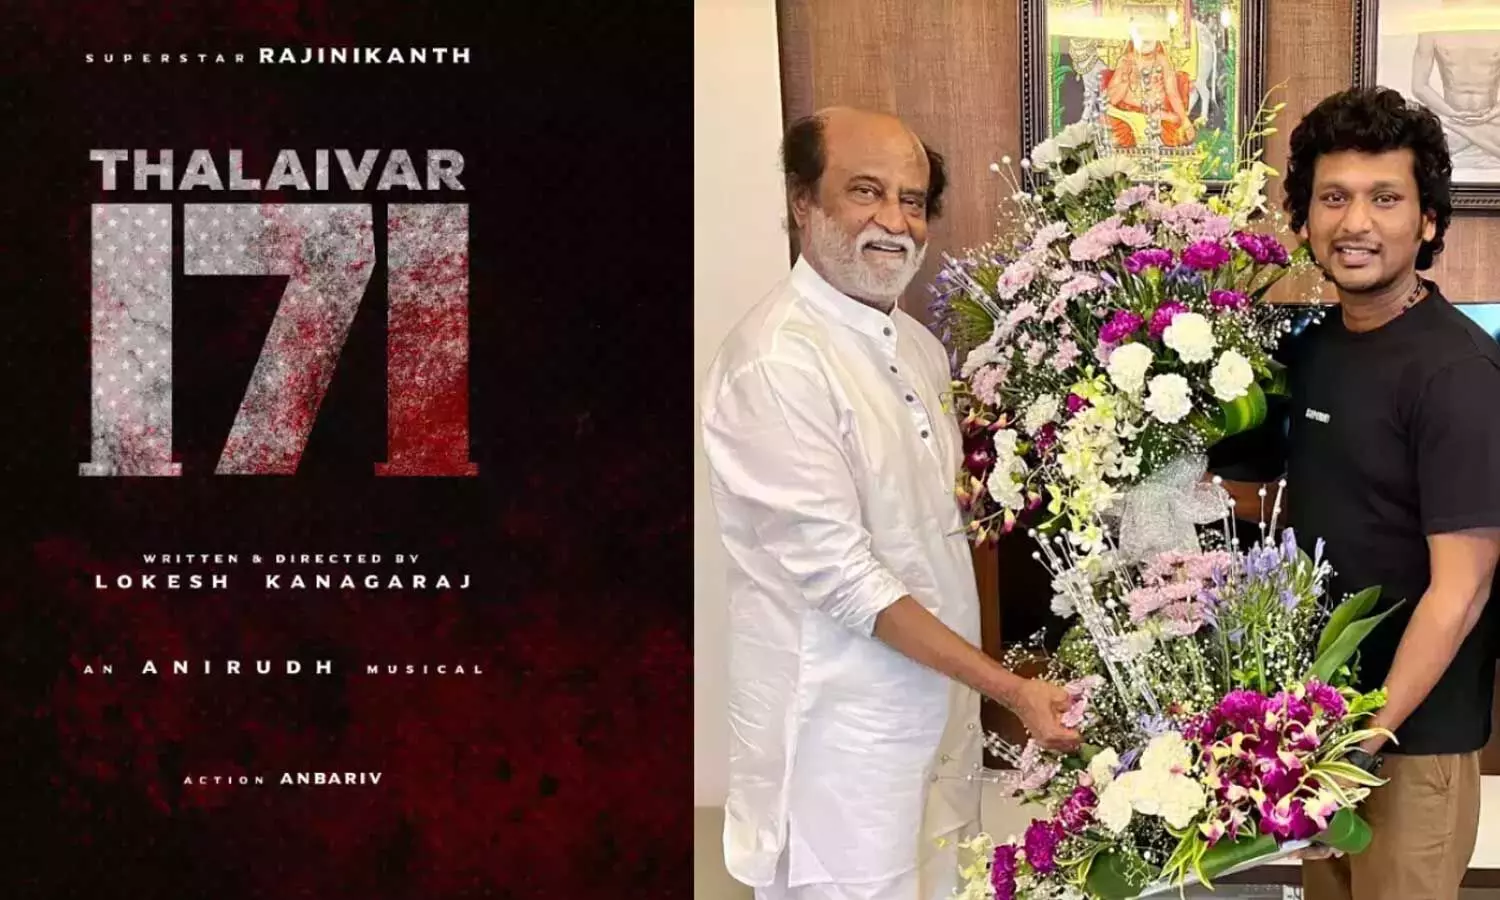 Thalaivar171 is not a part of Lokesh Cinematic Universe